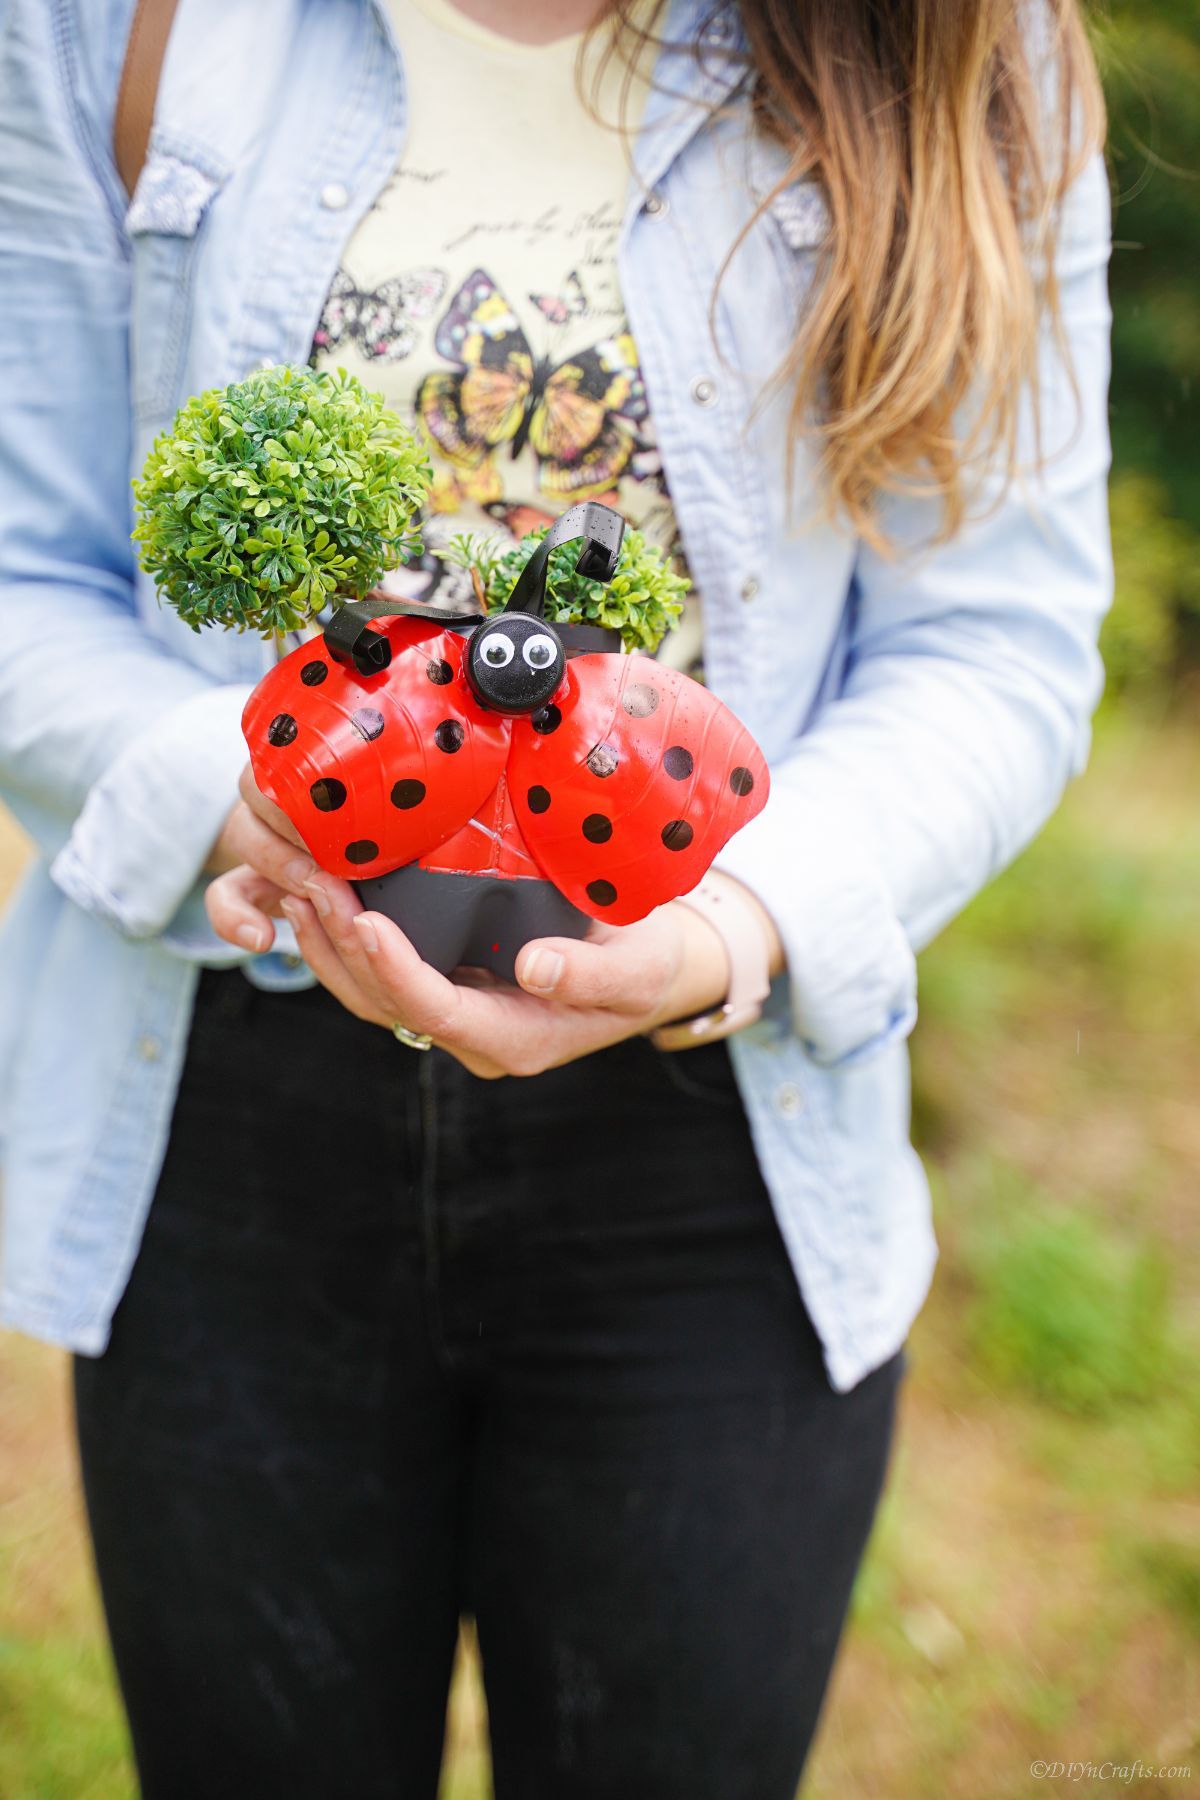 red ladybug planter held by woman